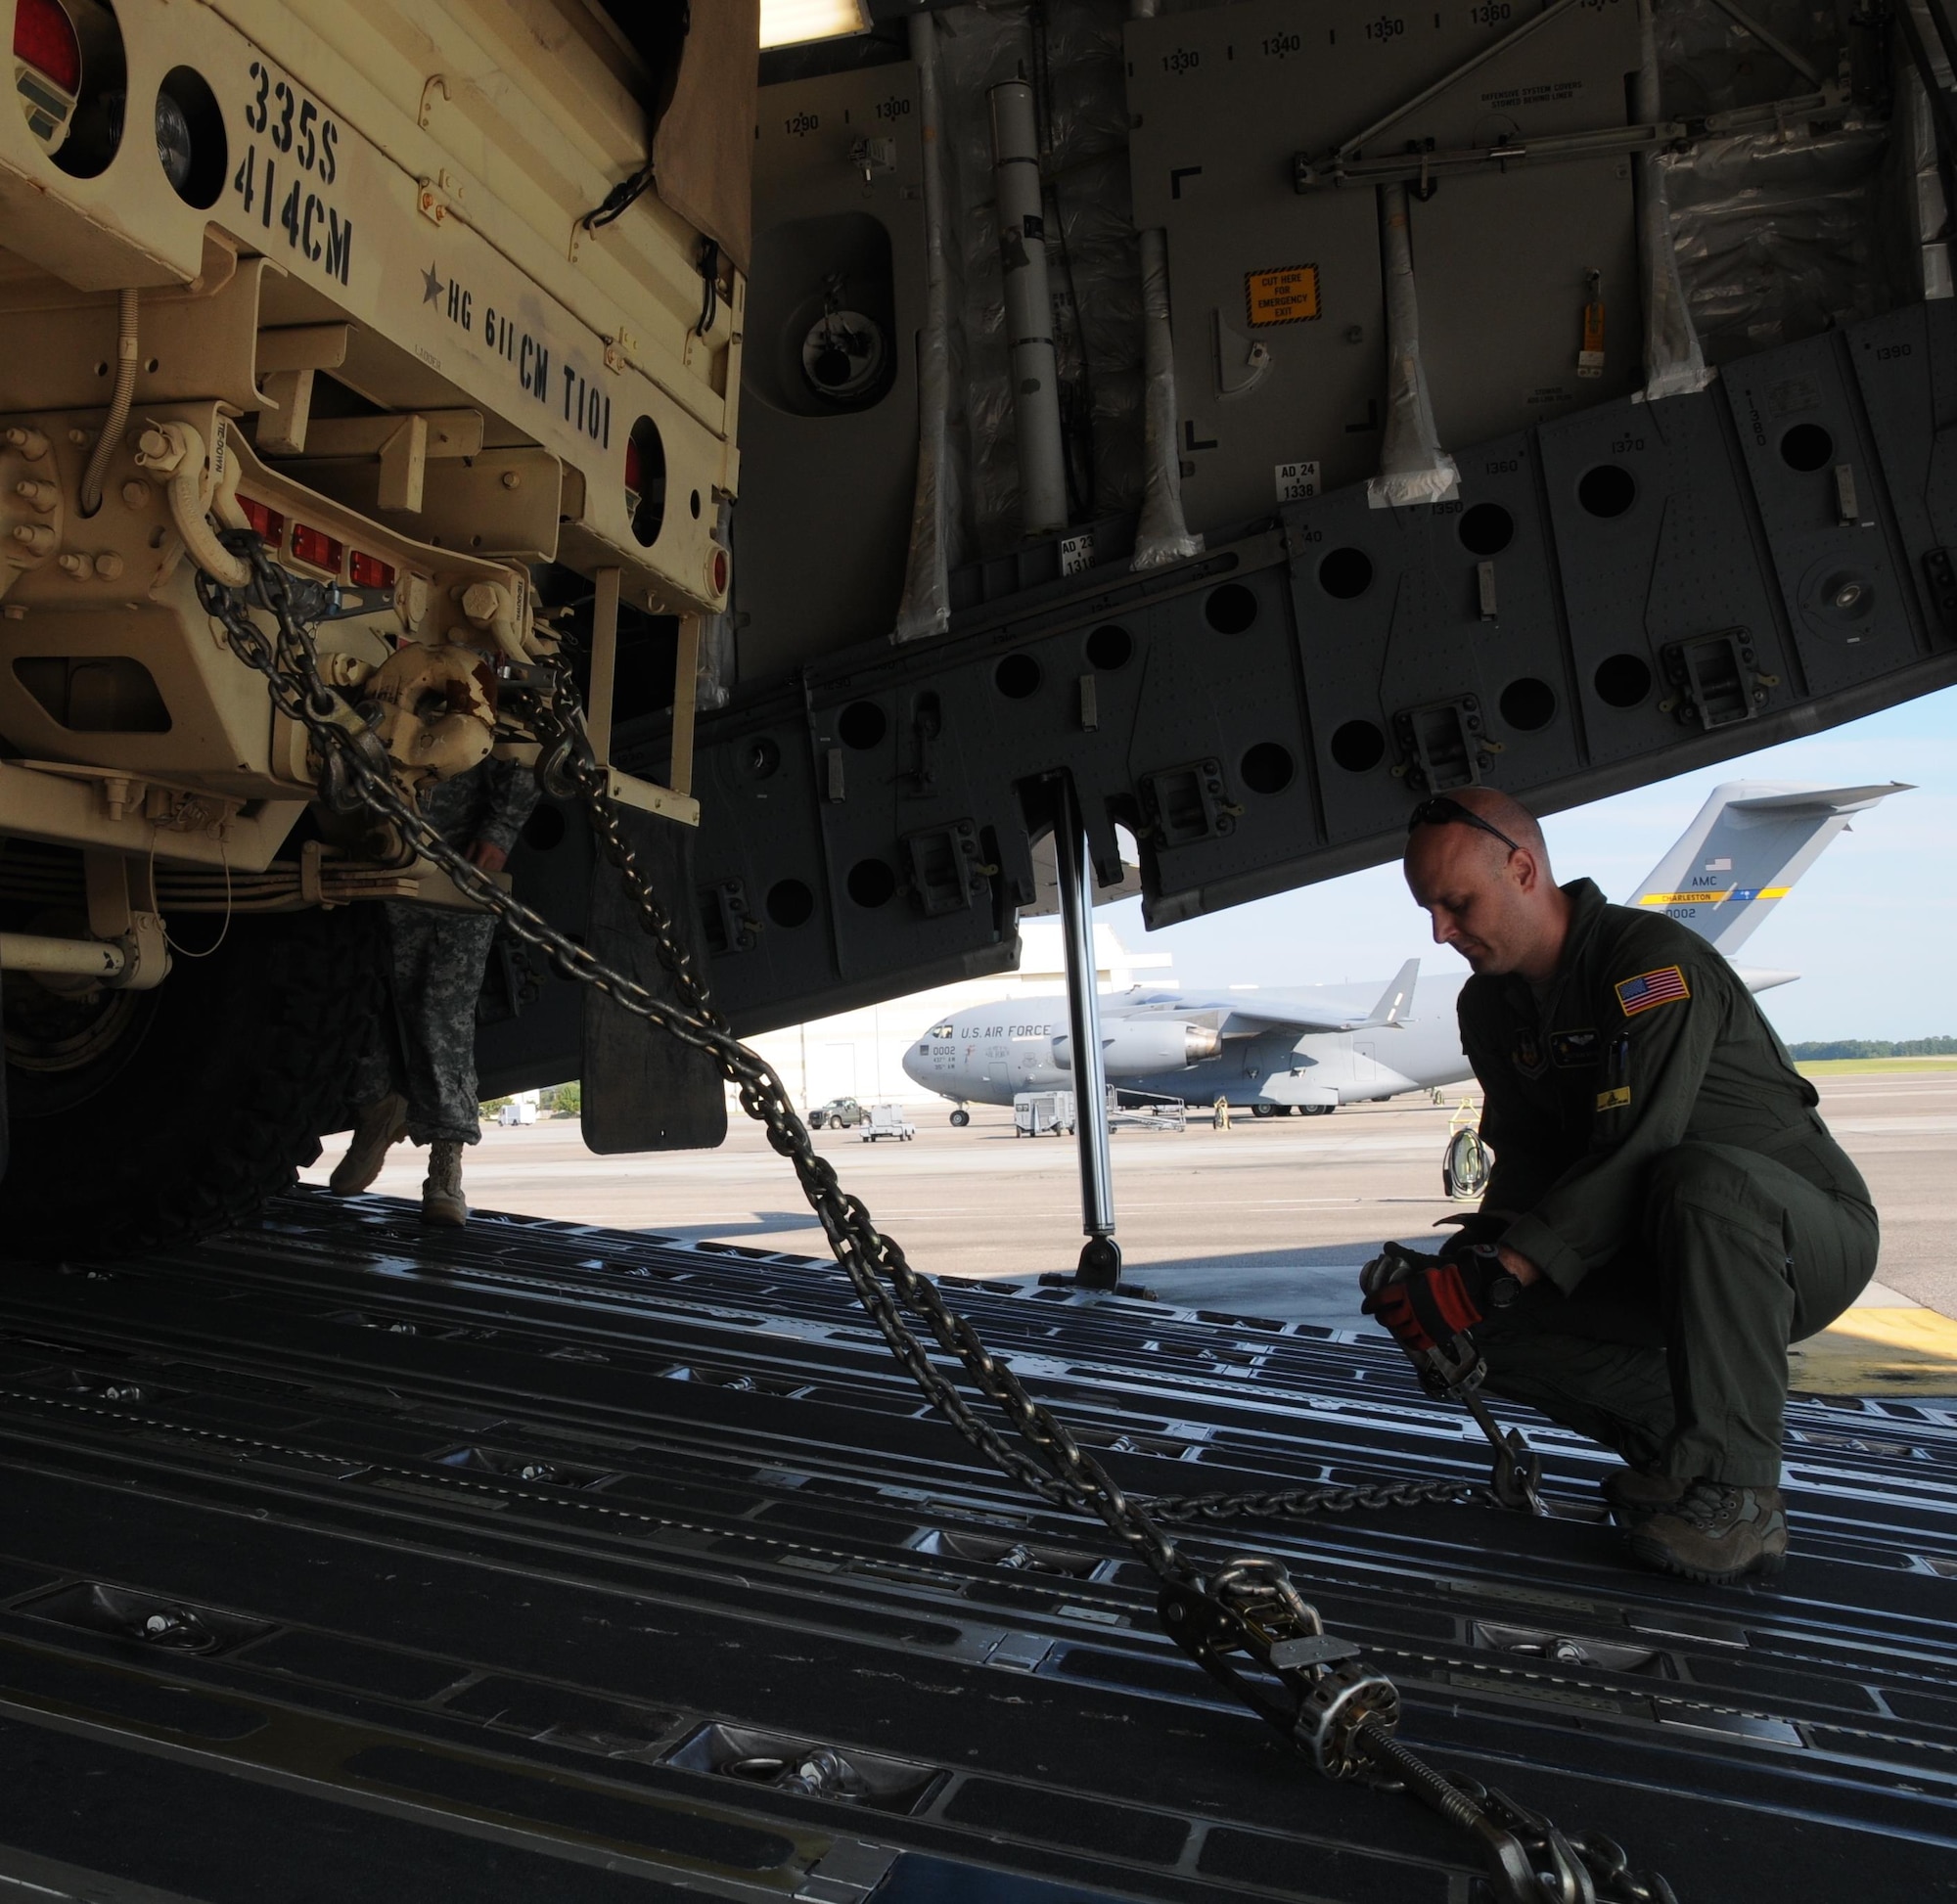 Staff Sgt. Doug Wattier a Loadmaster with the 317th Airlift Squadron based in Charleston, S.C., chains down a Light Medium Tactical Vehicle LMTV into the cargo bay of a Boeing C-17 Globe master Aug. 15, 2015, in support of Operation Red Dragon. Red Dragon is a Civil Defense readiness exercise incorporating Army Reserve and National Guard Soldiers with civilian first responder agencies such as fire departments, police departments and hospitals to improve capabilities in large-scale chemical defense operations. (U.S. Army photo by Sgt. 1st Class Anthony Florence)